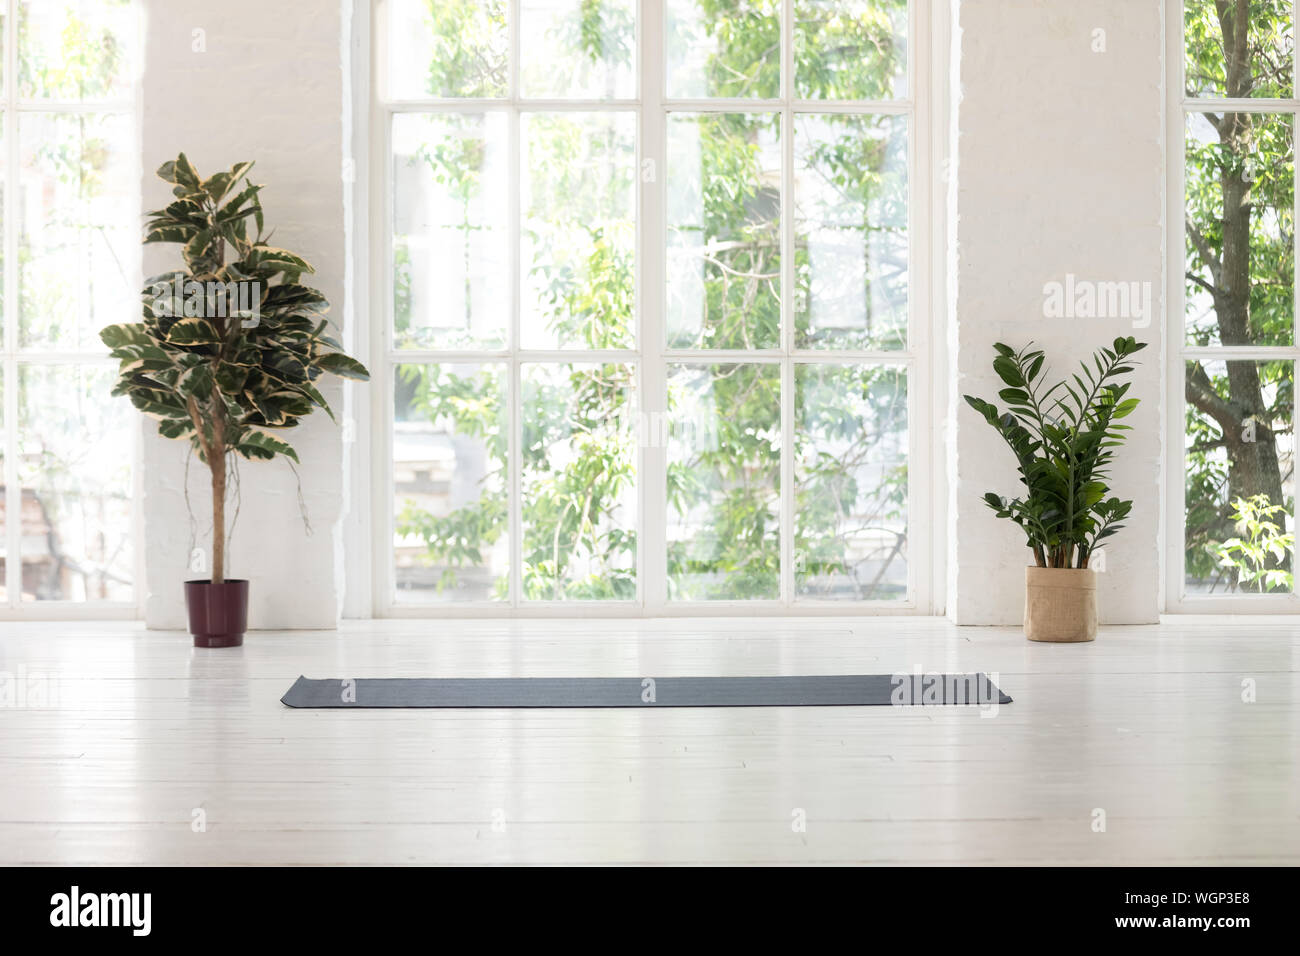 Yoga studio interior with windows, plants and unrolled mat Stock Photo